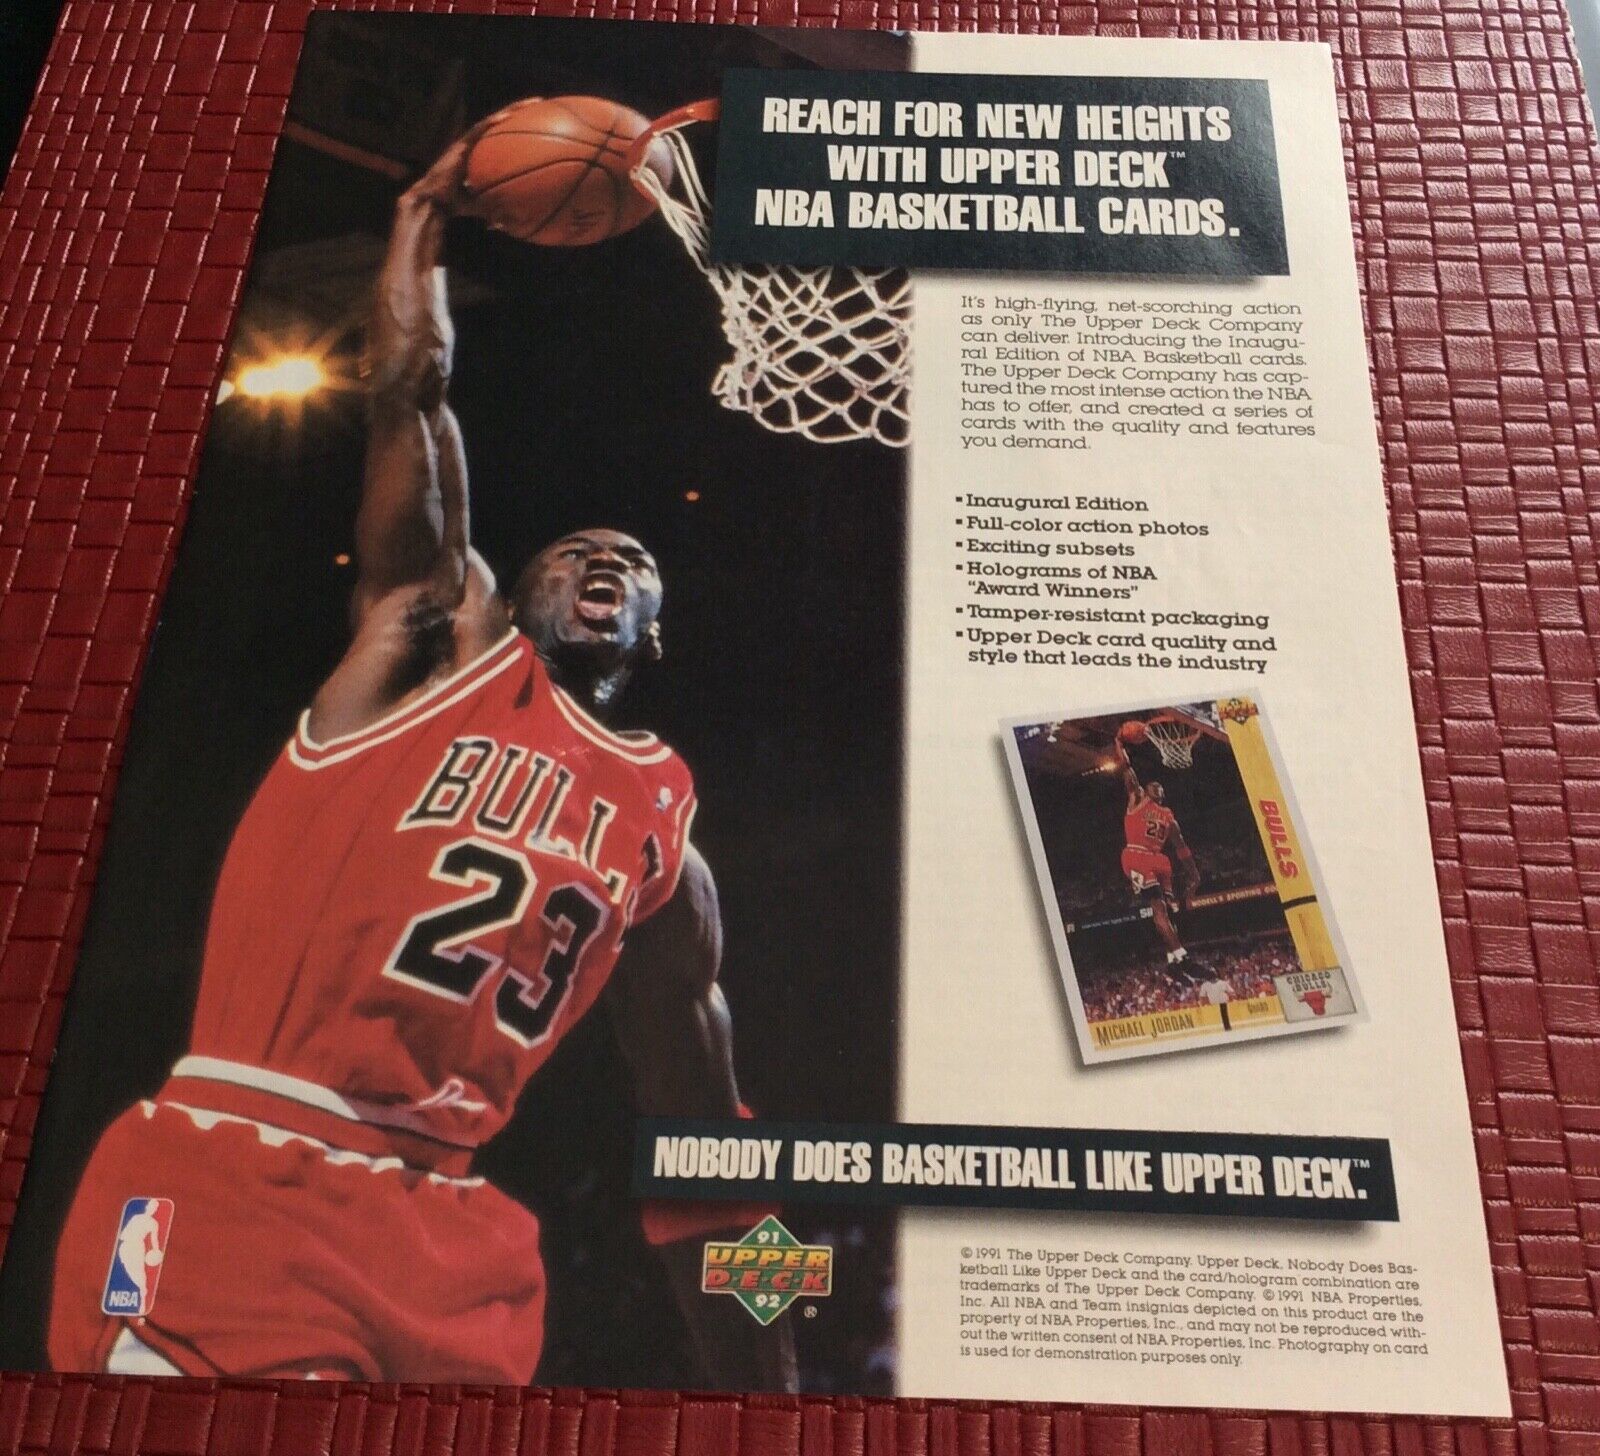 1991-92 Upper Deck Print Ad Poster Art (Frame Not Included)